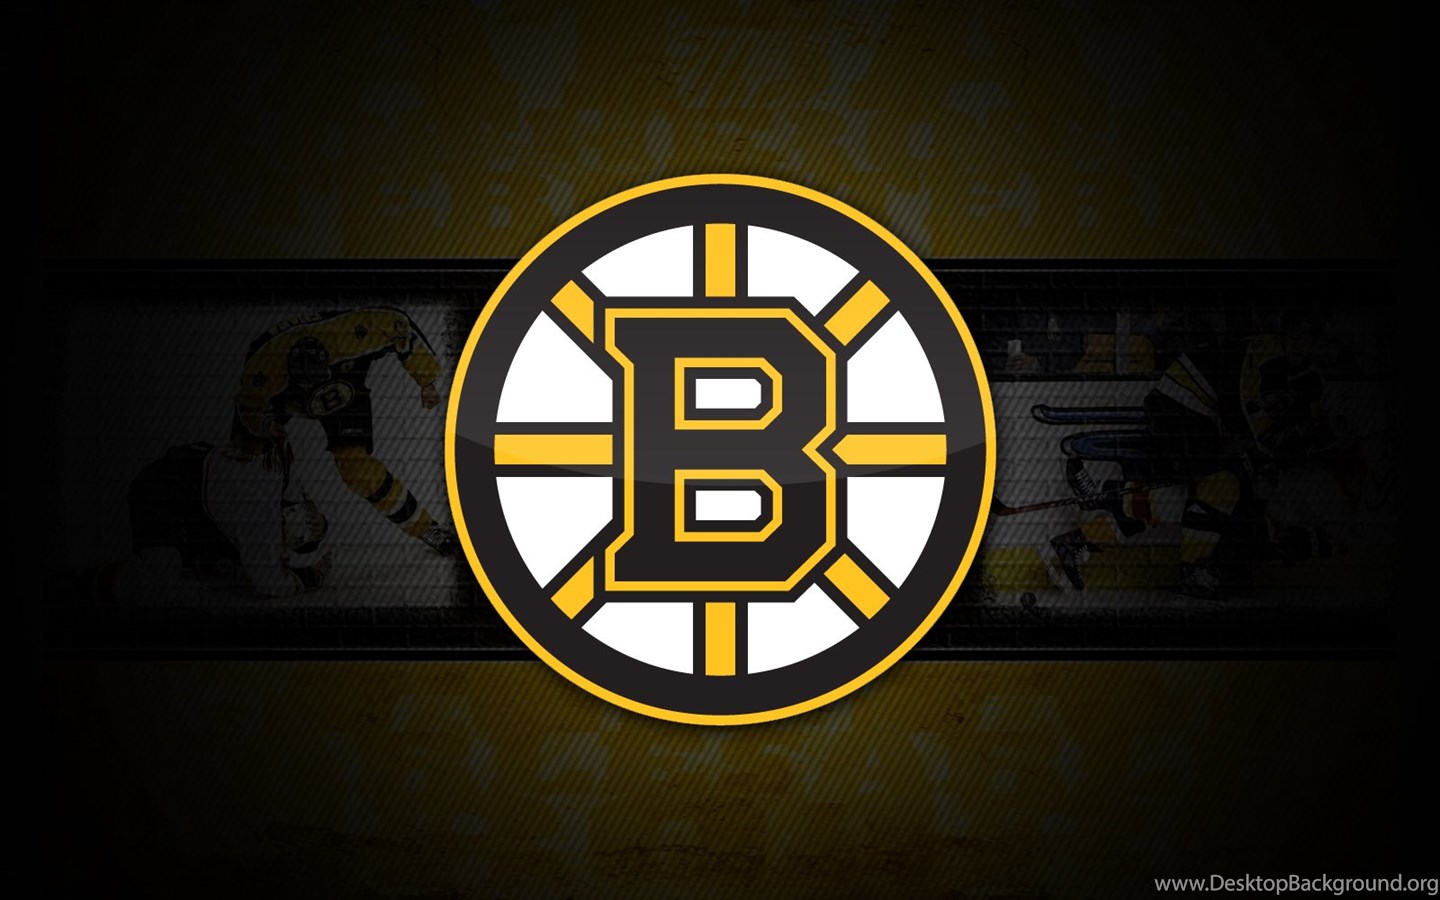 The Most Important Problem In Boston Bruins Comes Right Down To This Word That Starts With "W"